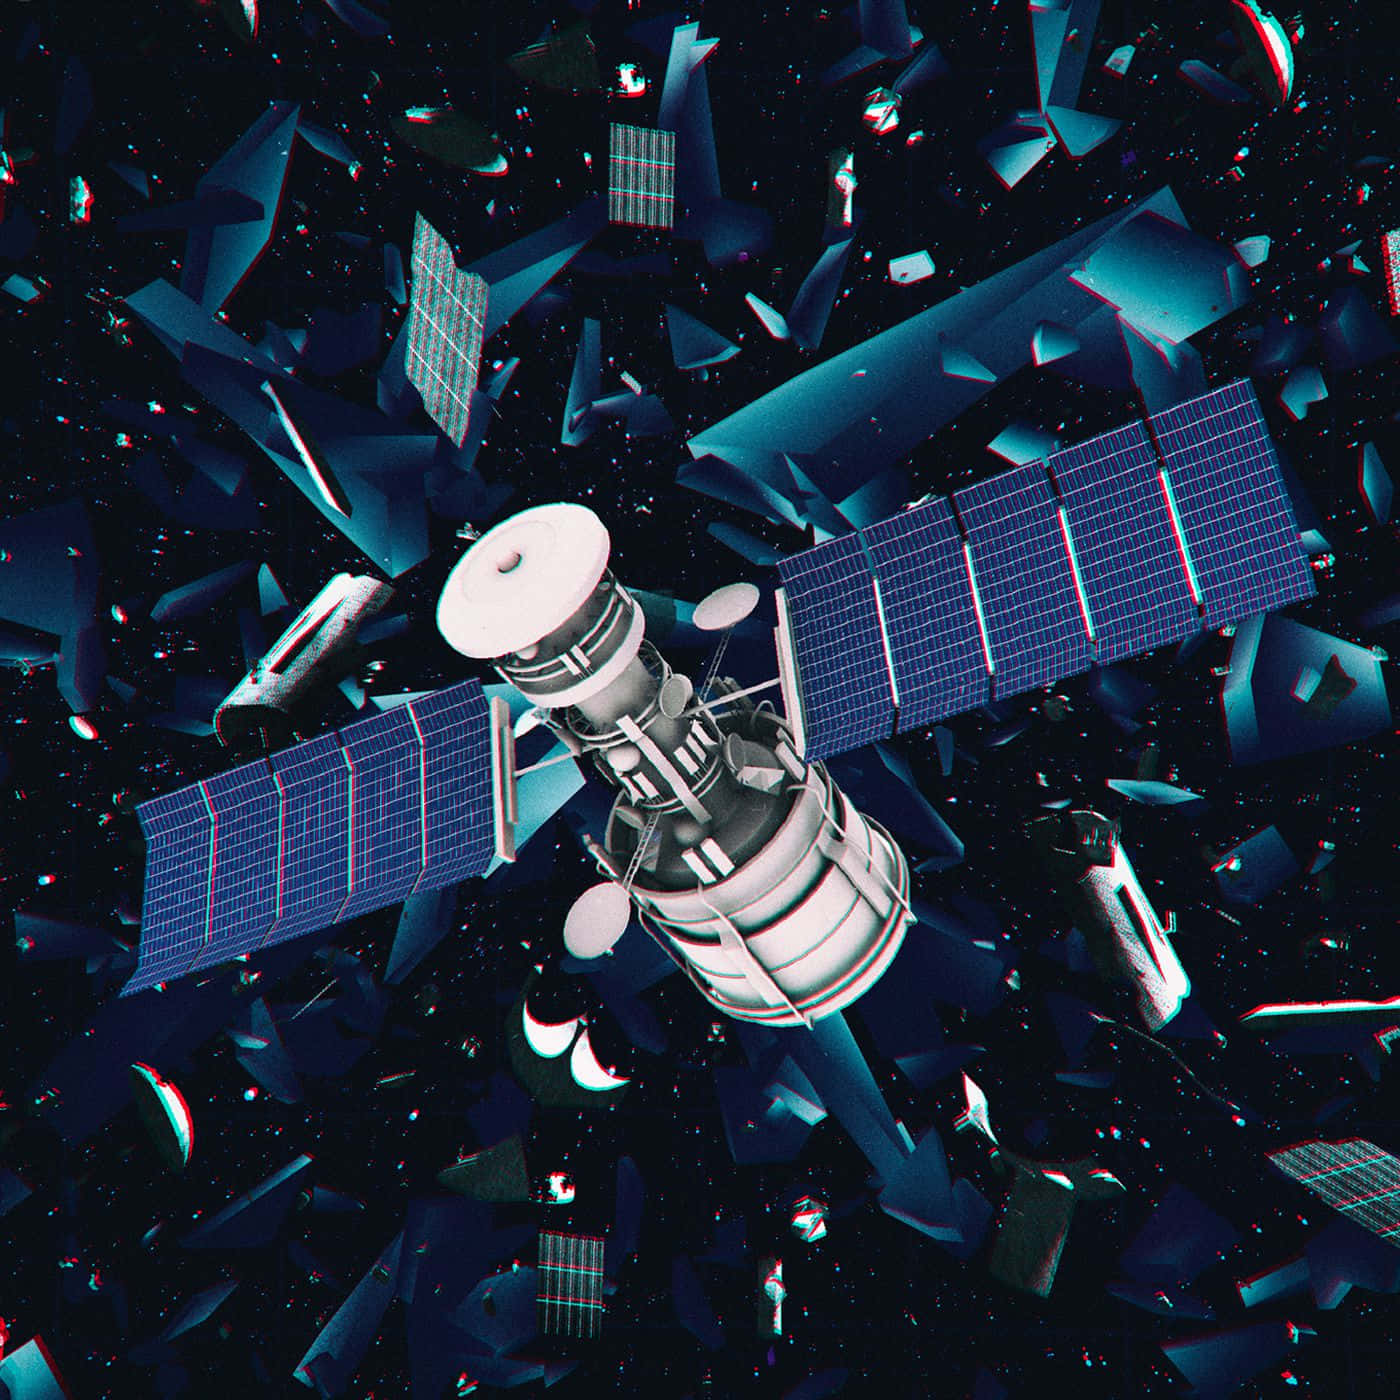 An Up-Close View of a Space Satellite